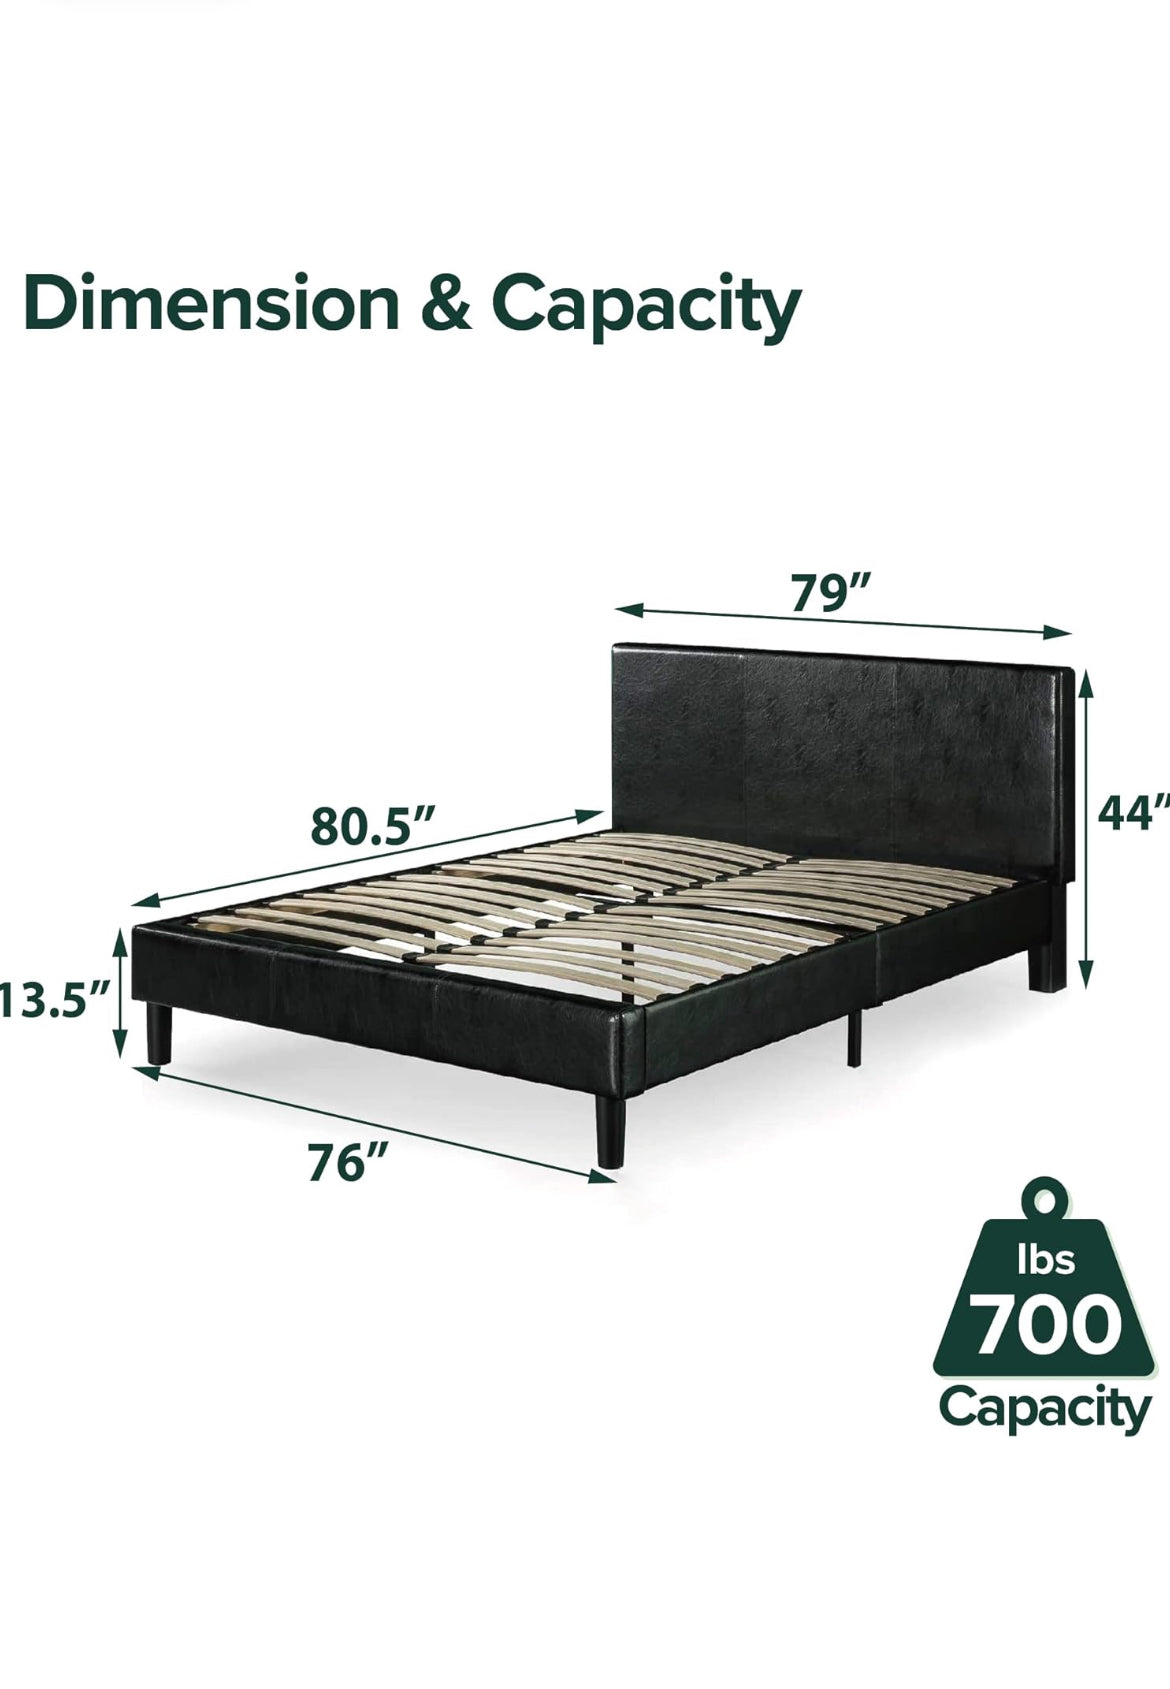 ZINUS Jade Faux Leather Upholstered Platform Bed Frame / Mattress Foundation with Wood Slat Support / No Box Spring Needed / Easy Assembly, King